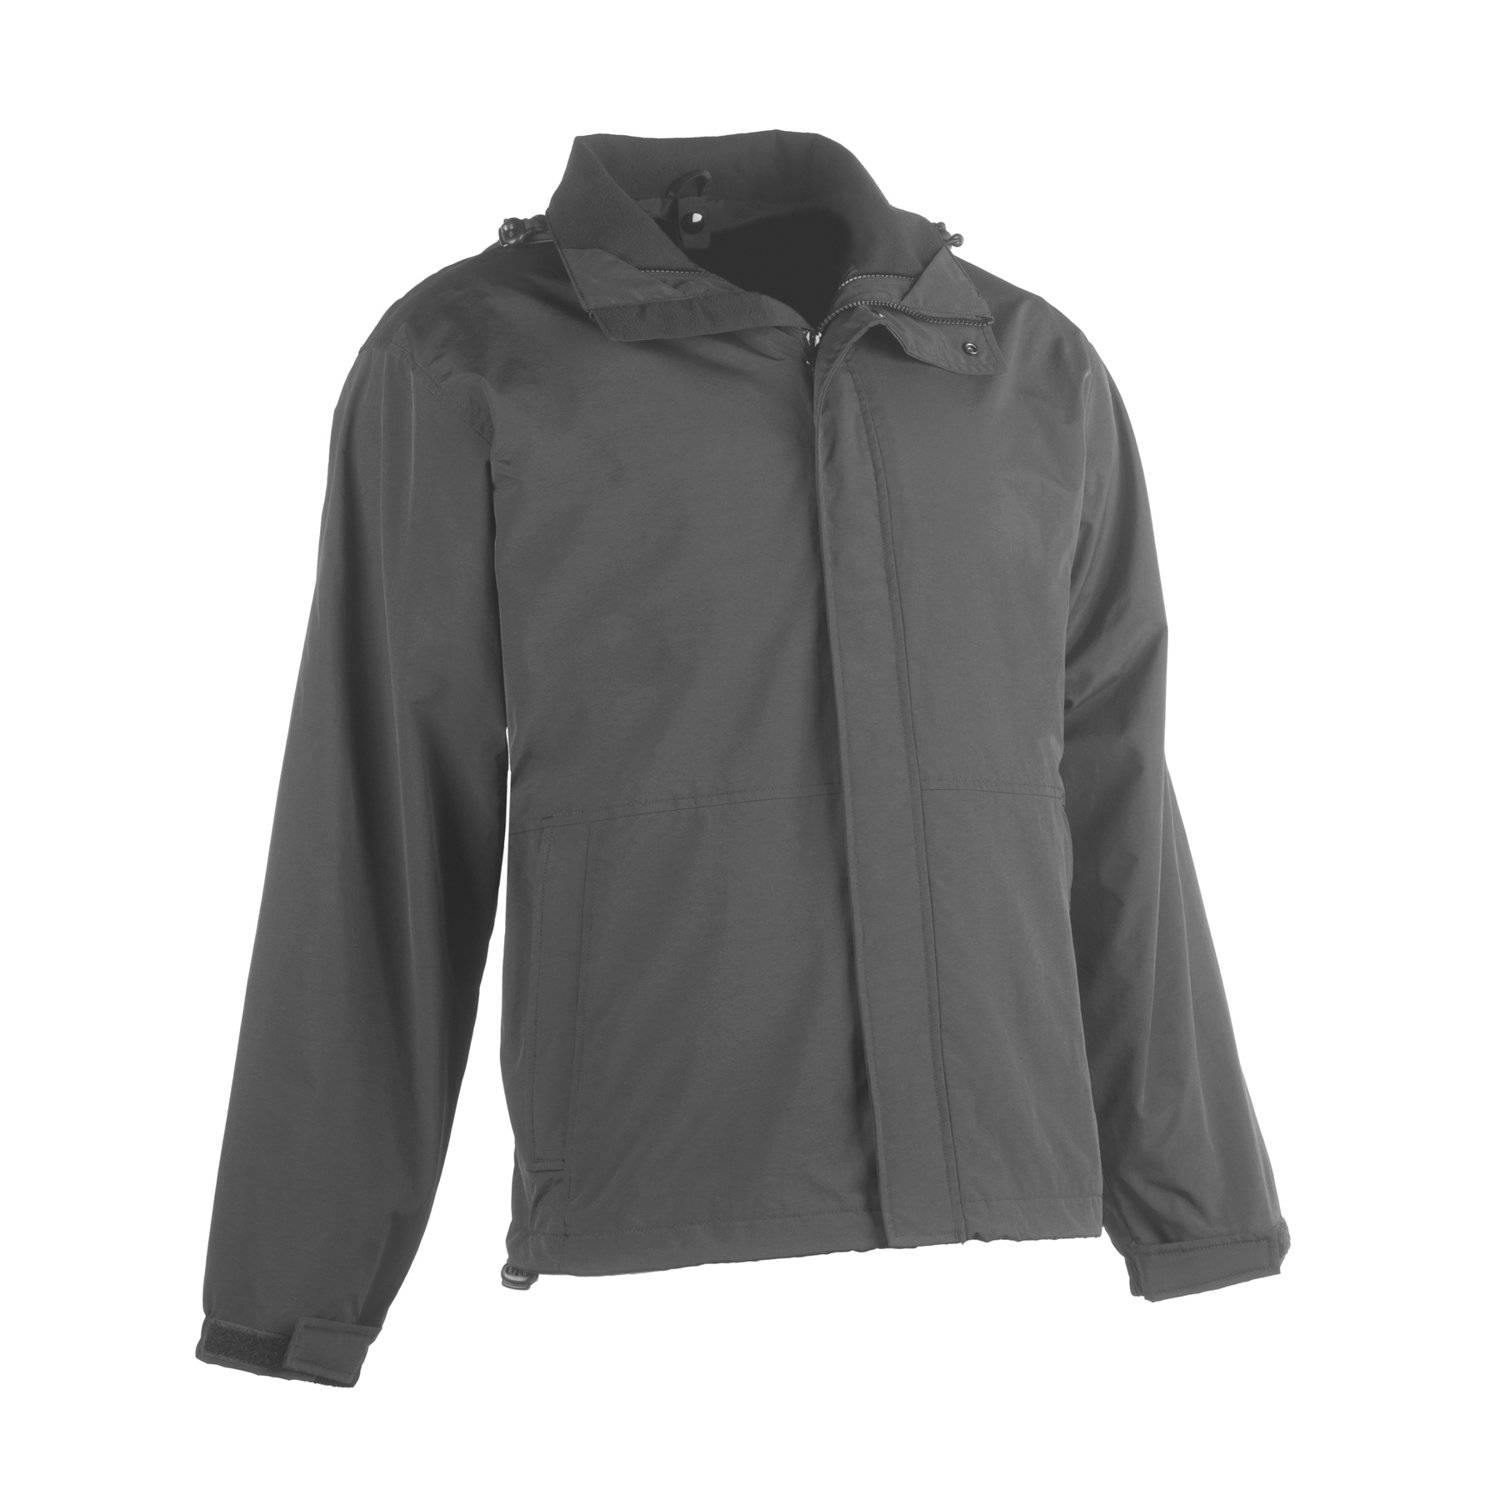 GALLS MIDWEIGHT SYSTEM JACKET